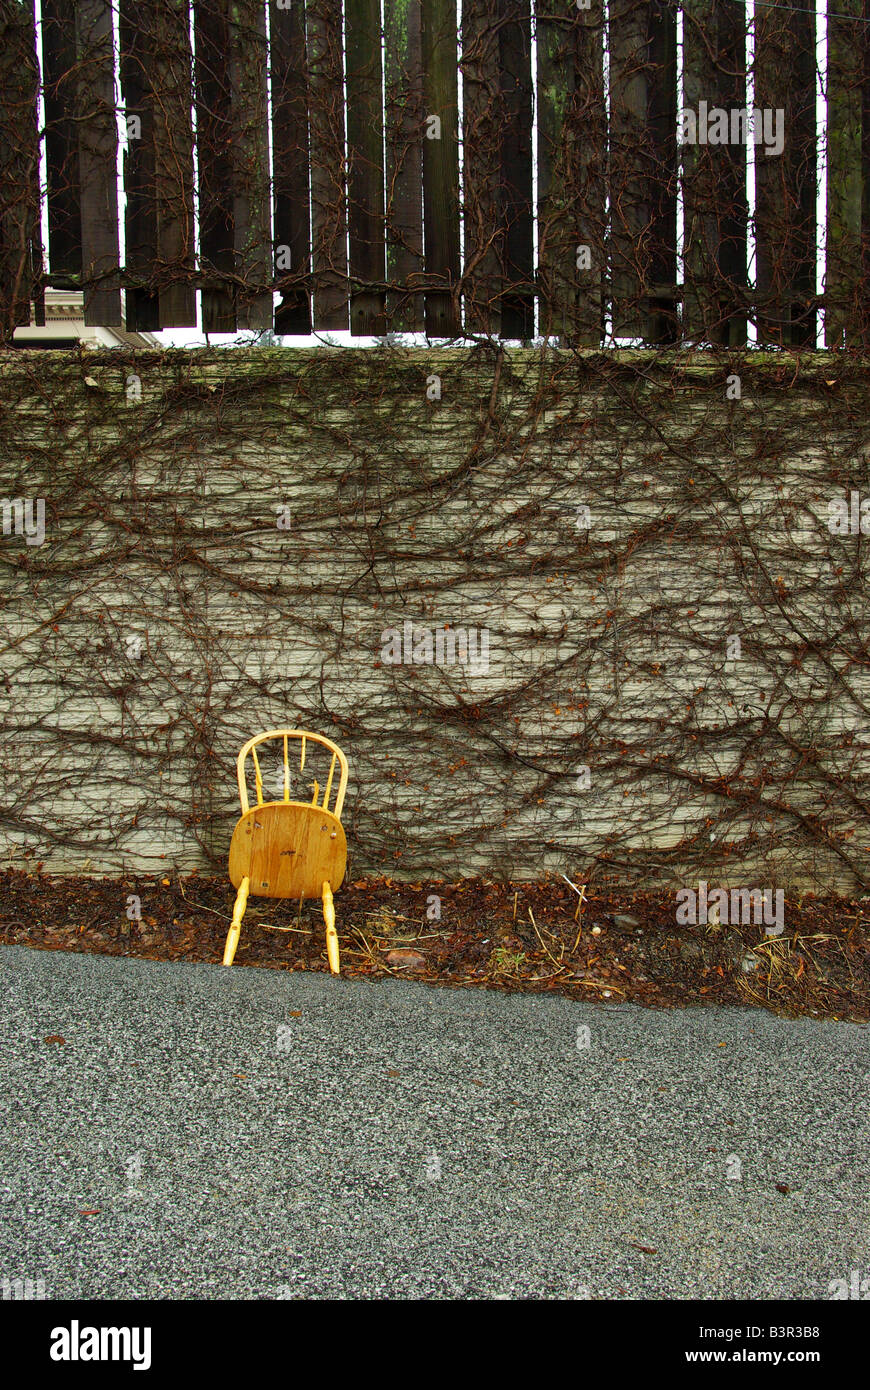 A small wooden chair is abandoned against a vine covered stone and wood fence in the winter. Stock Photo